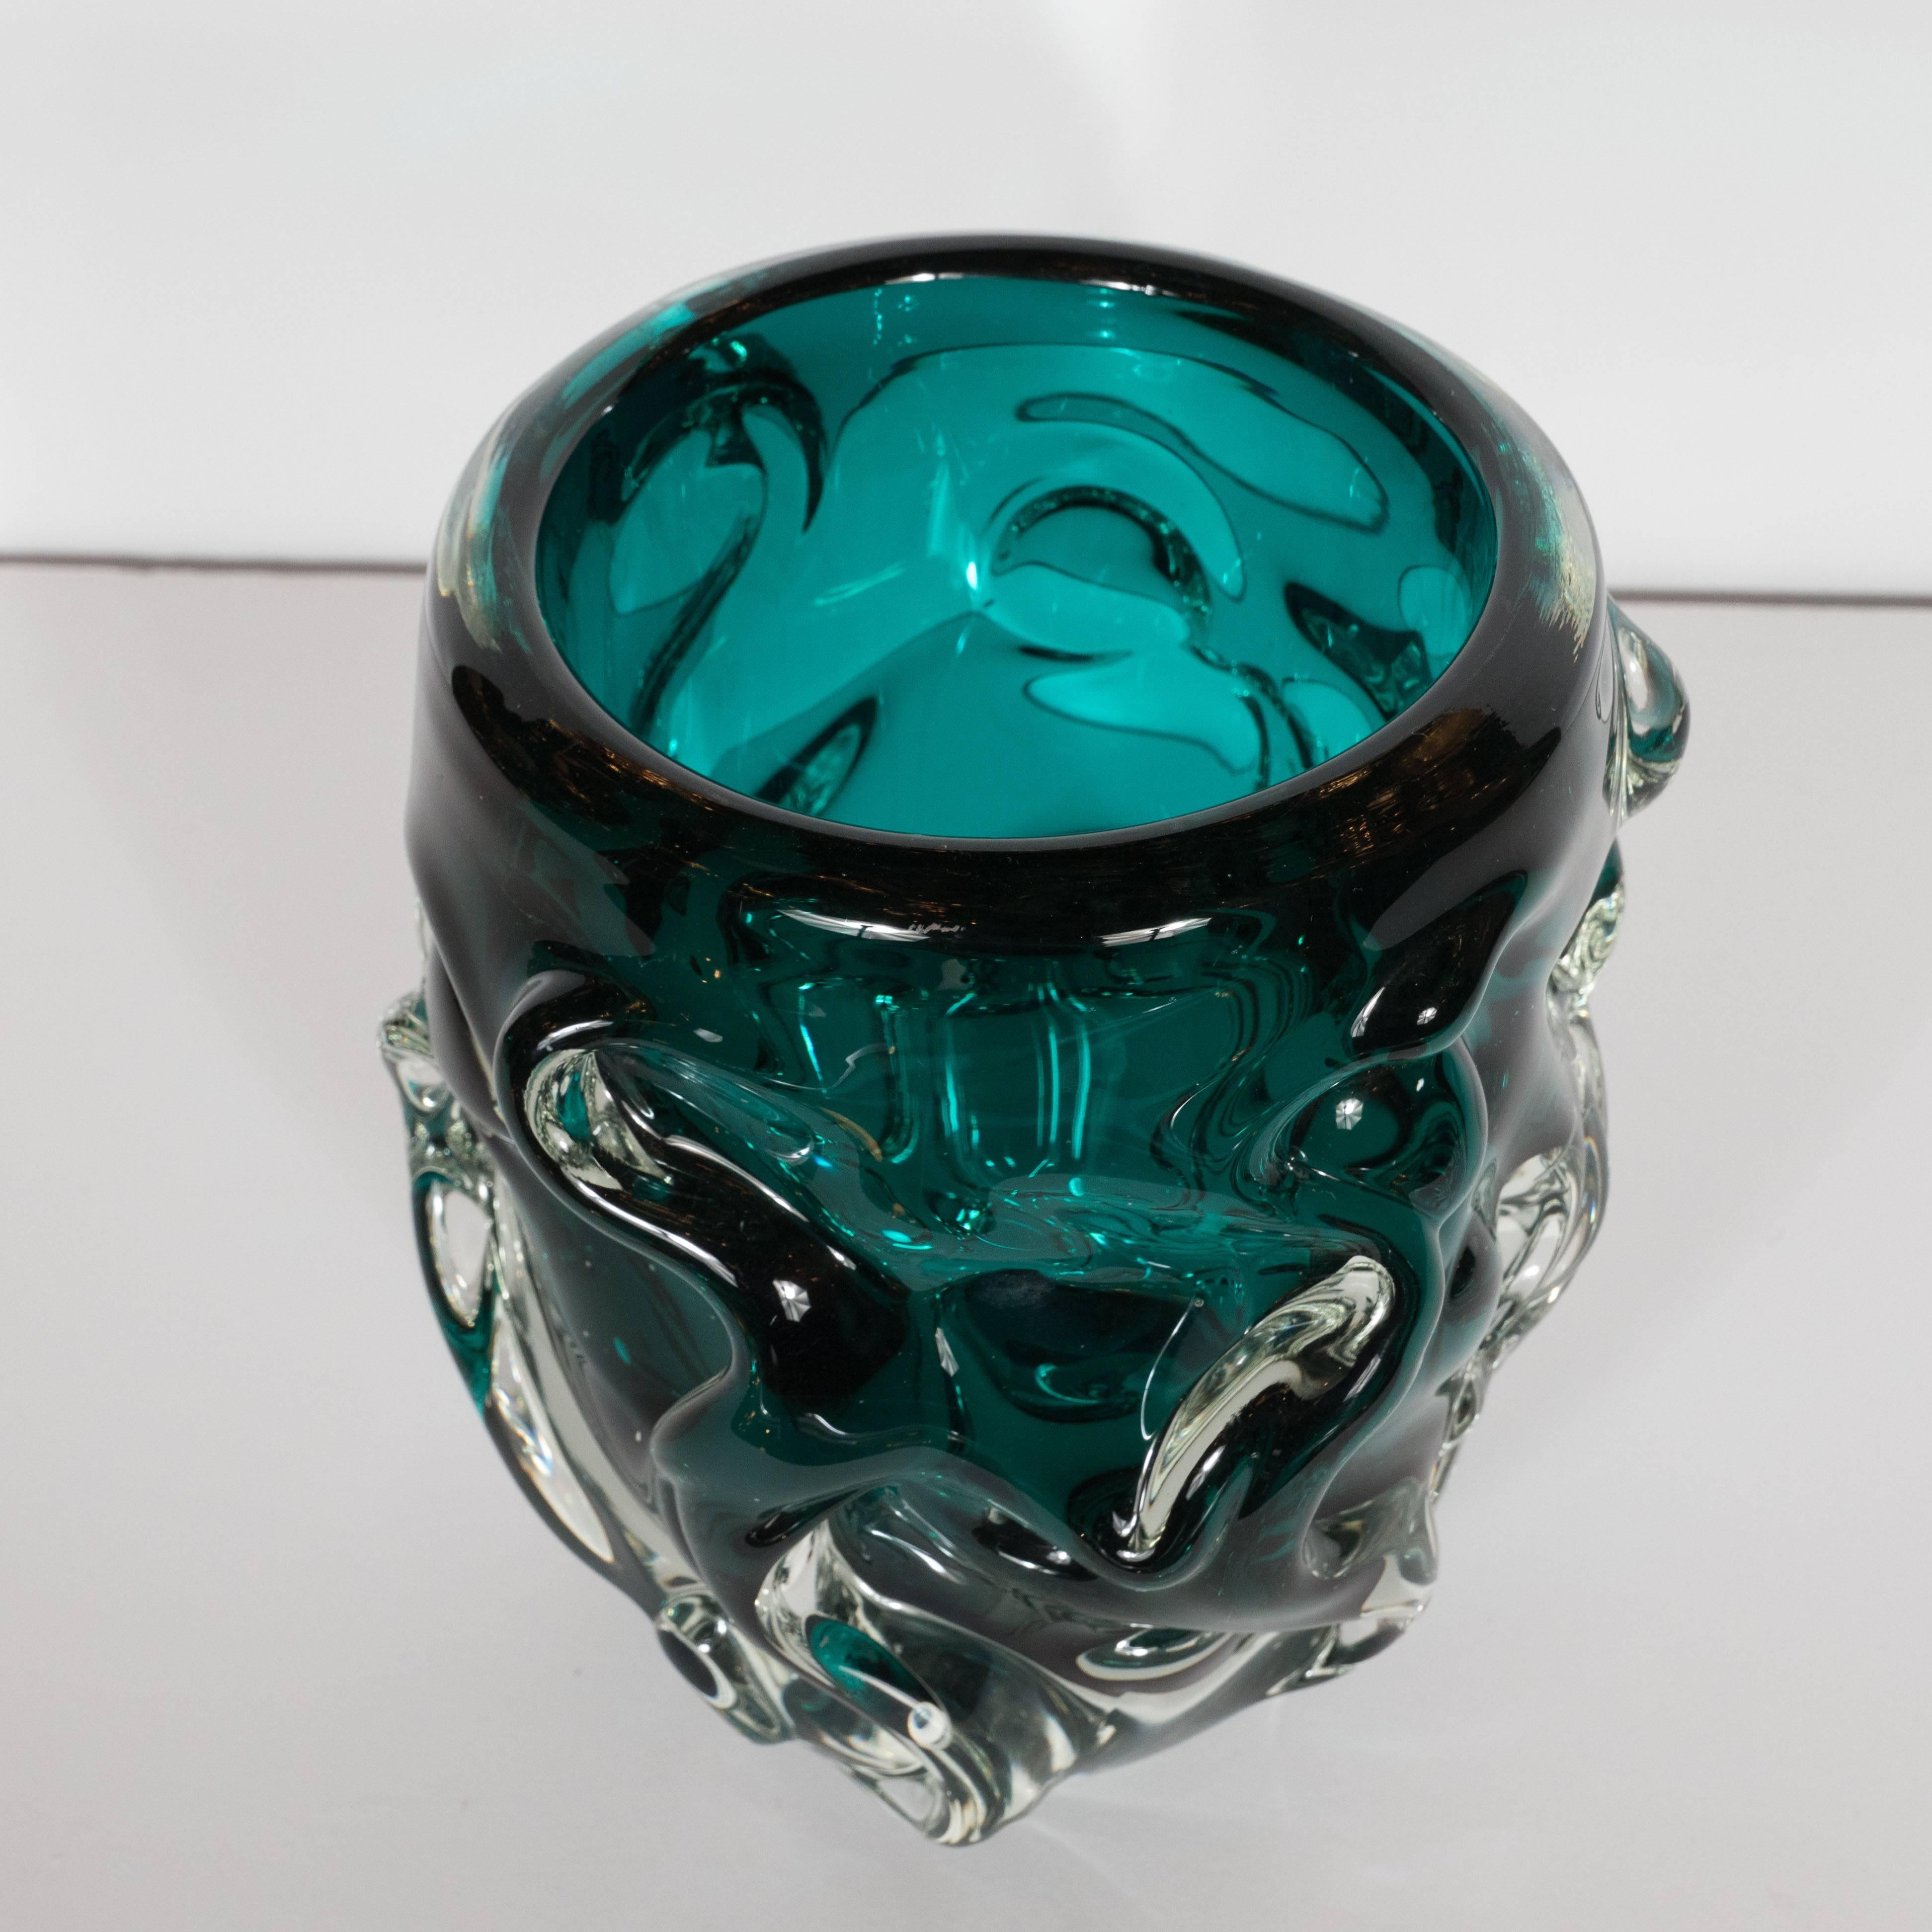 Mid-Century Modern Handblown Sculptural Murano Vase with in Translucent and Teal Glass